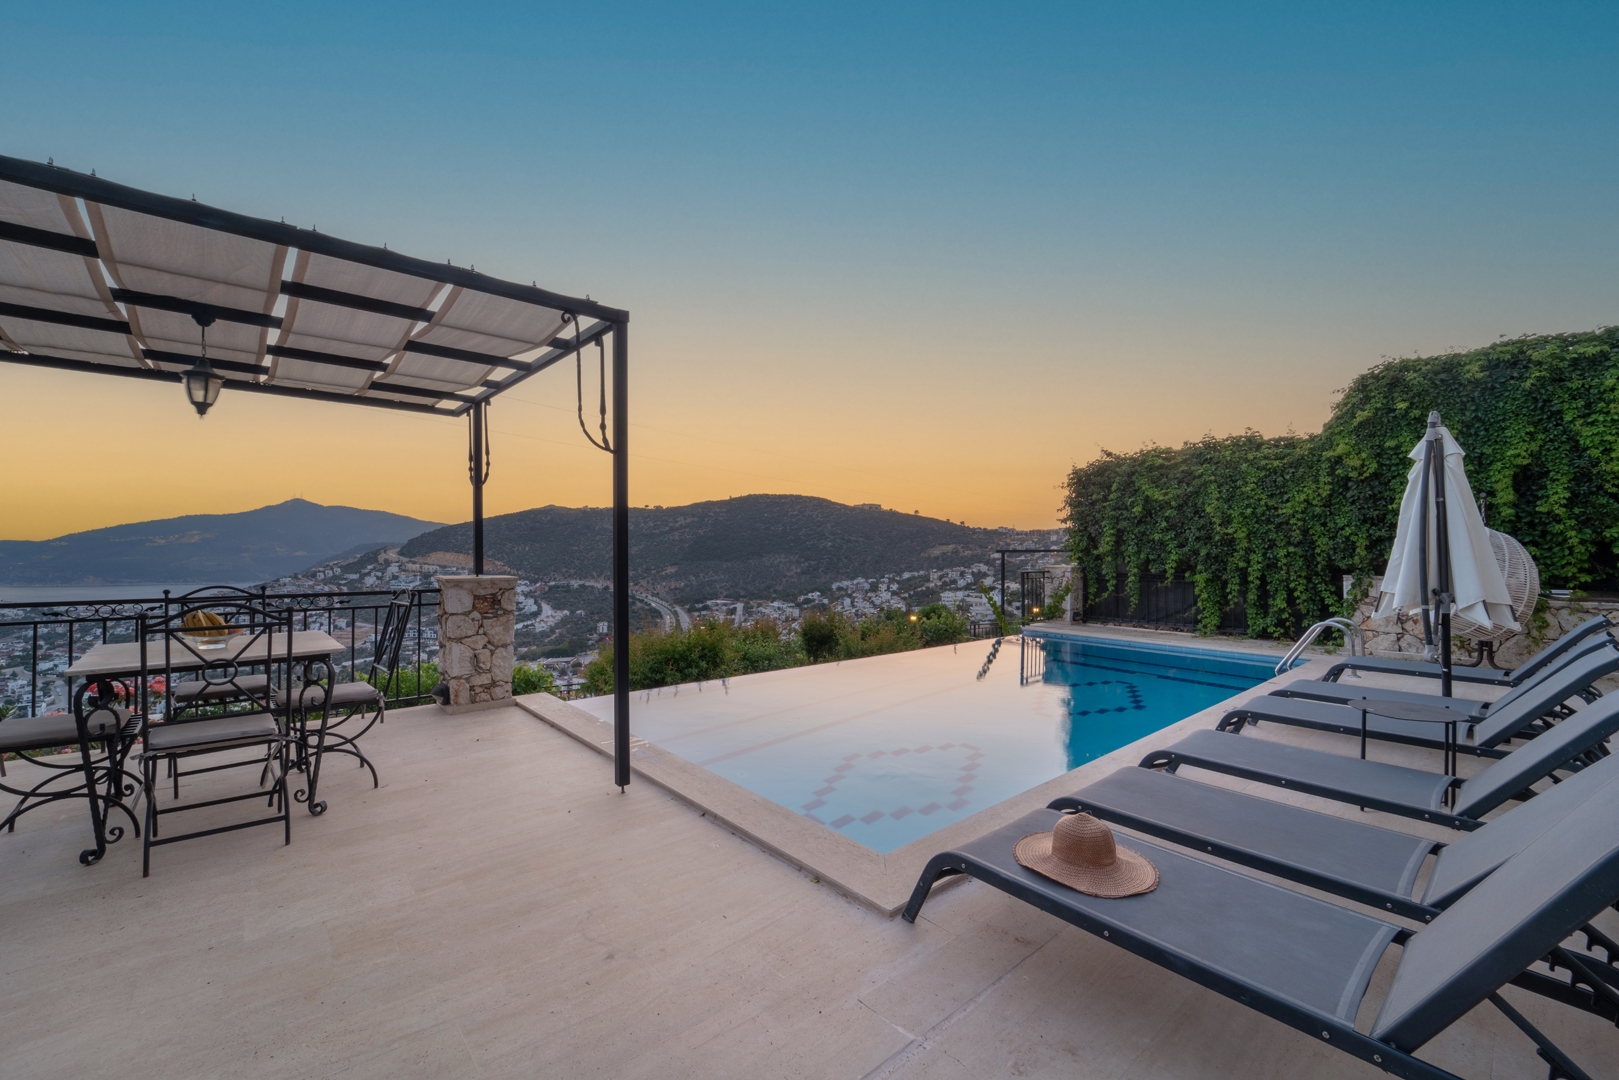 The address of a pleasant holiday in a luxury villa for you in Kalkan, Baynur Villas